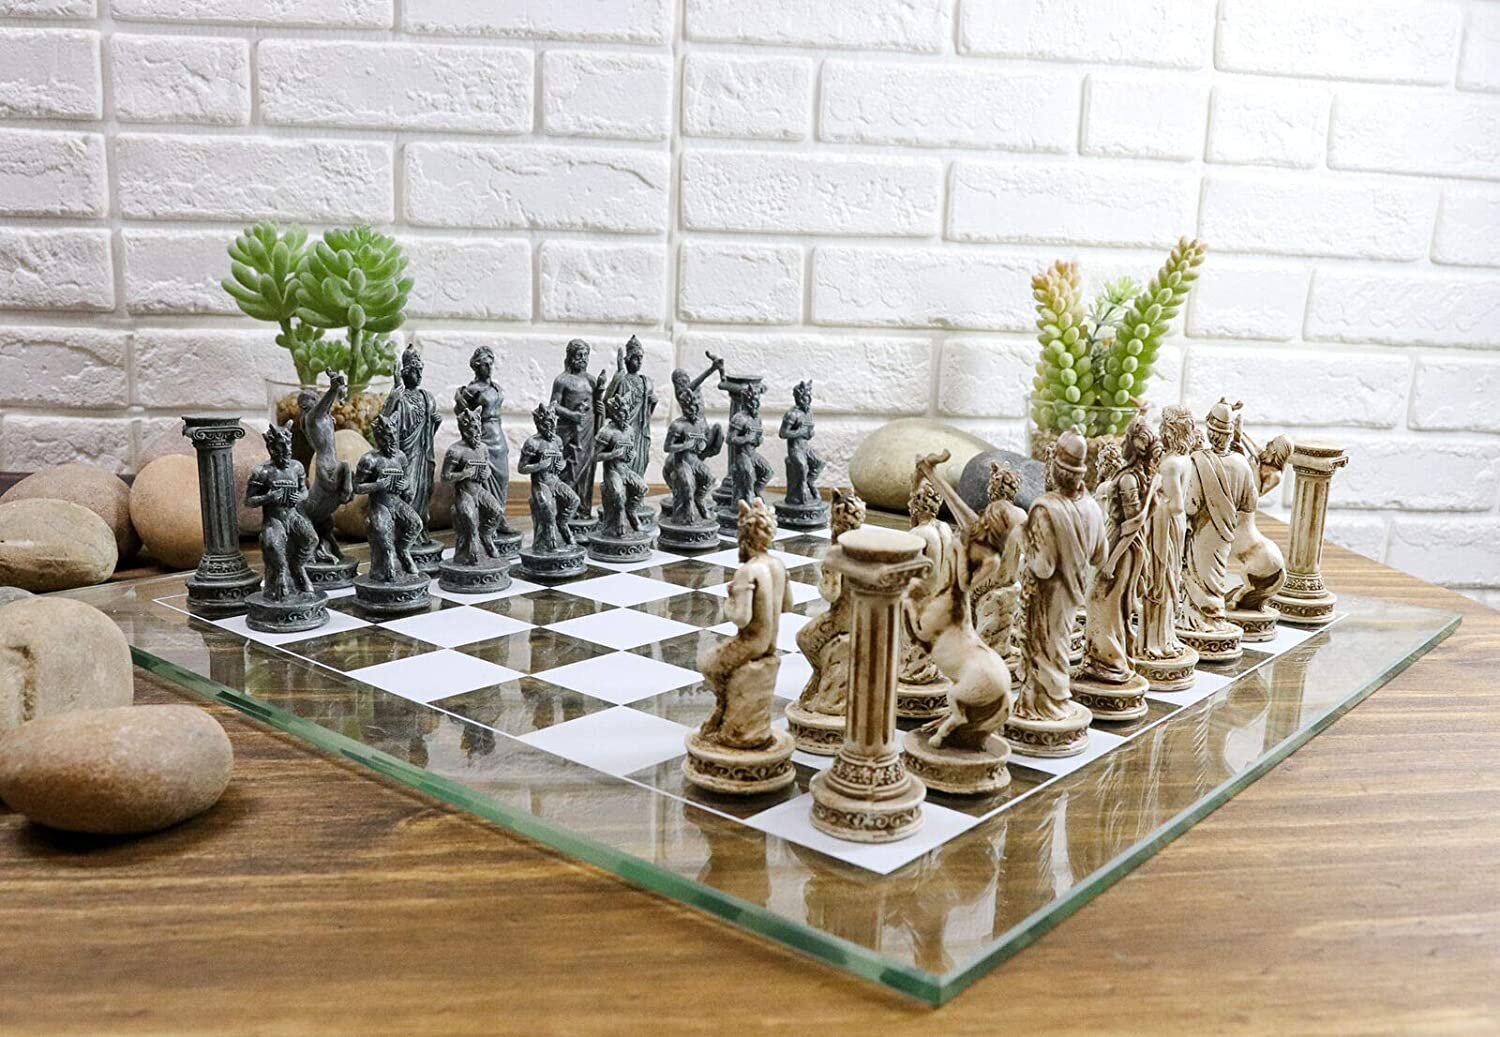  Luxury Chess Board Game Set Collectible Handmade